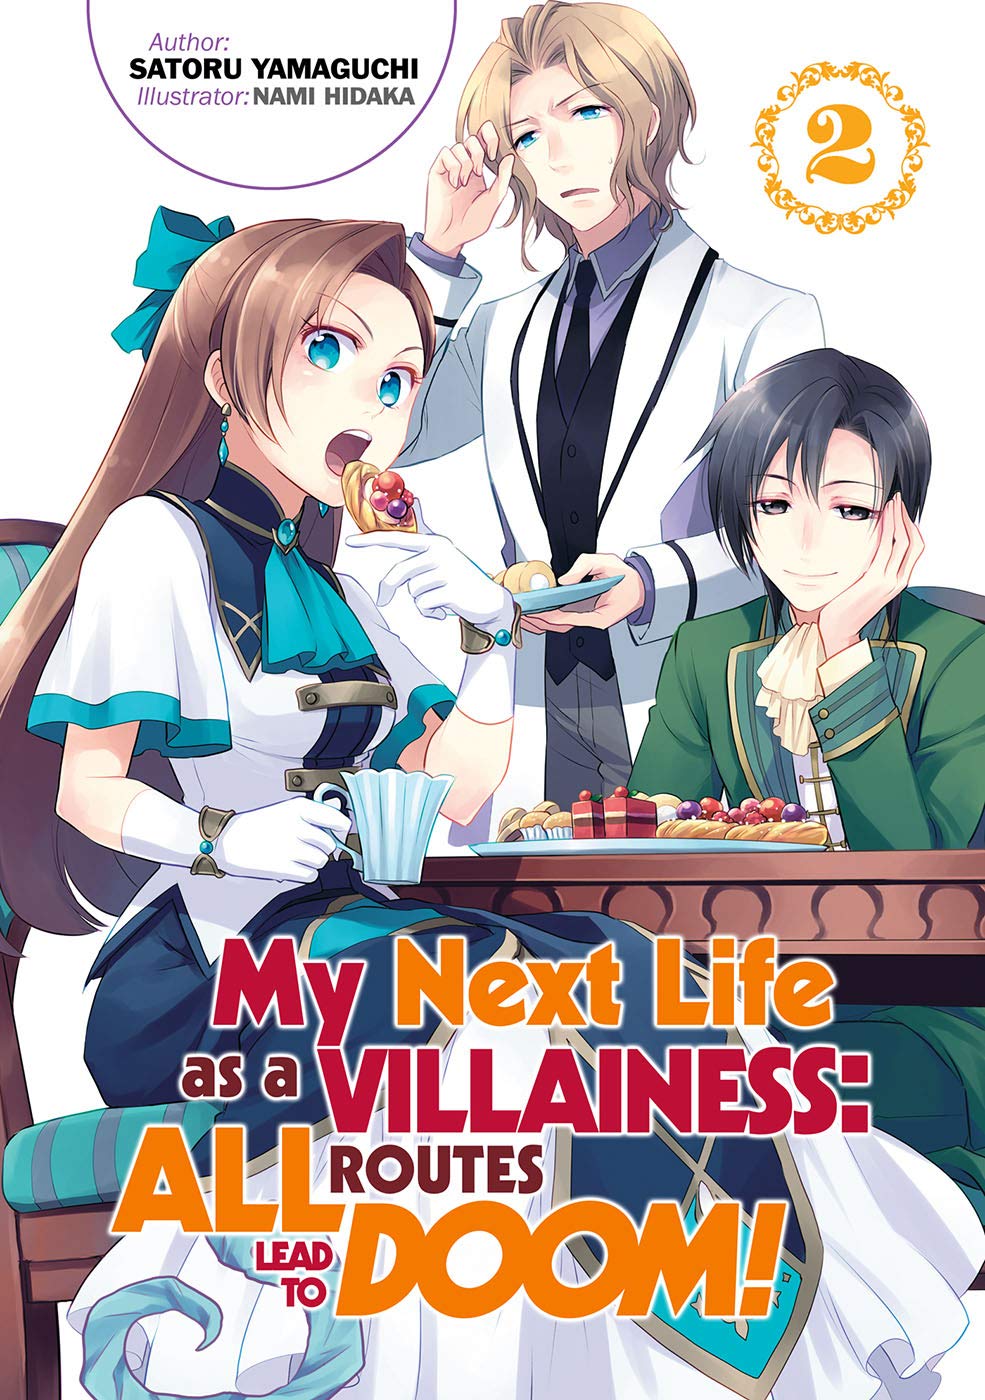 Is My Next Life as a Villainess good?乙女ゲームの破滅は良いですか？ A review.レビュー。